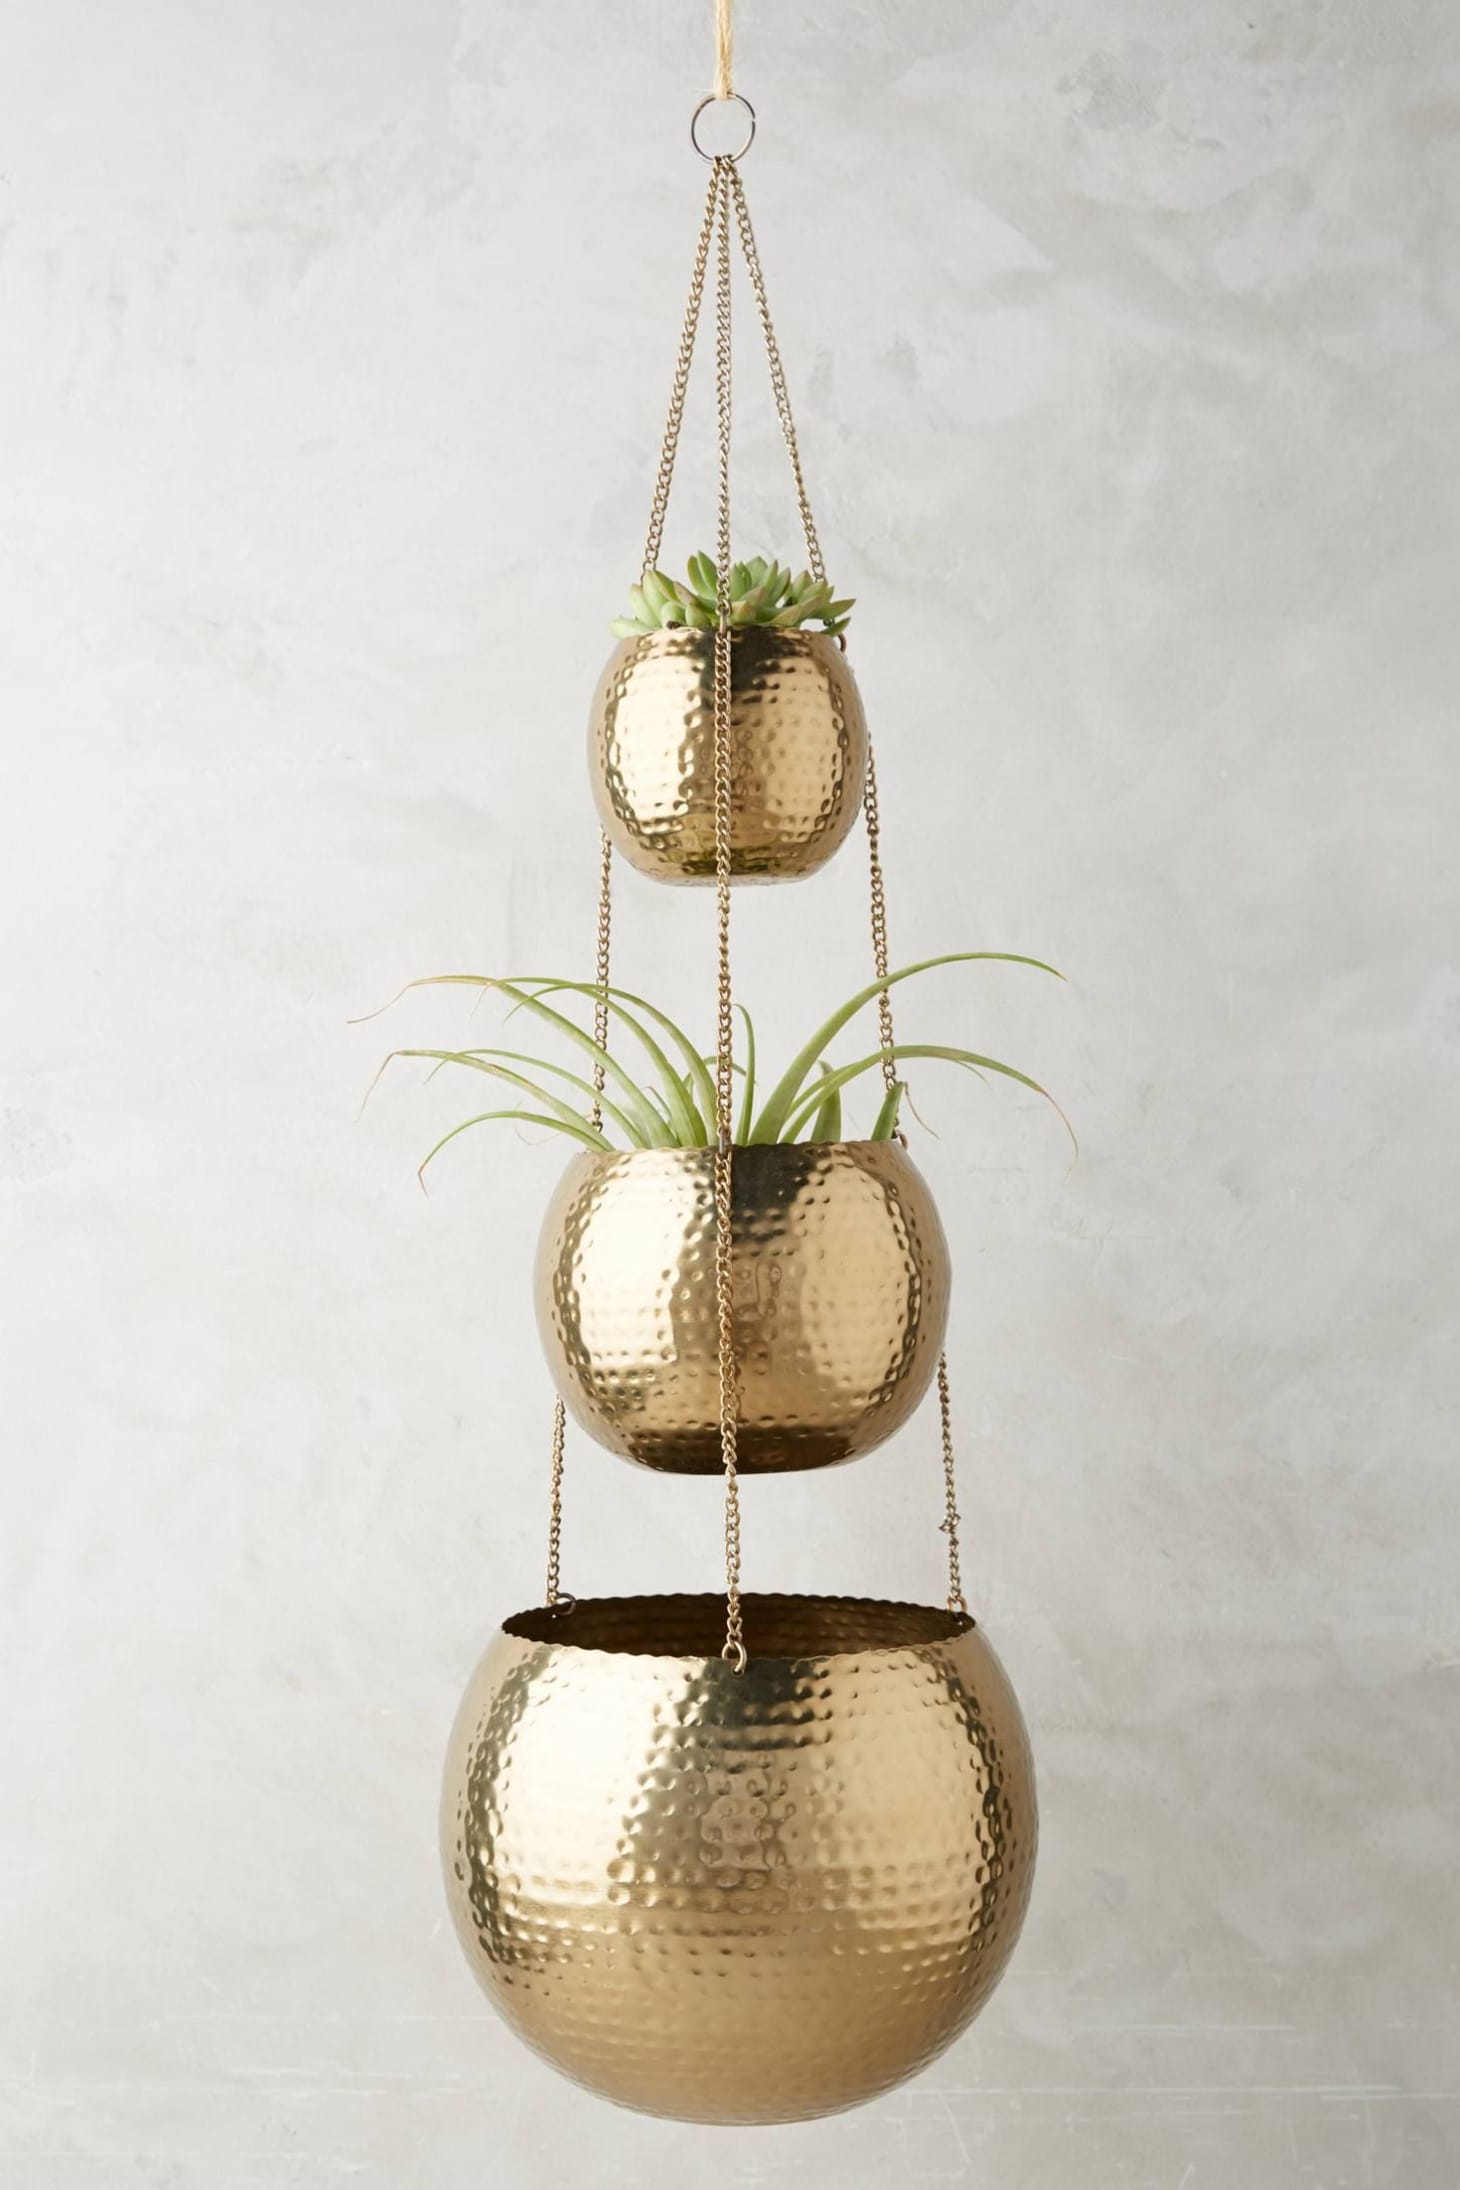 The Best Stylish Indoor Hanging Planters of 2018 Apartment Therapy